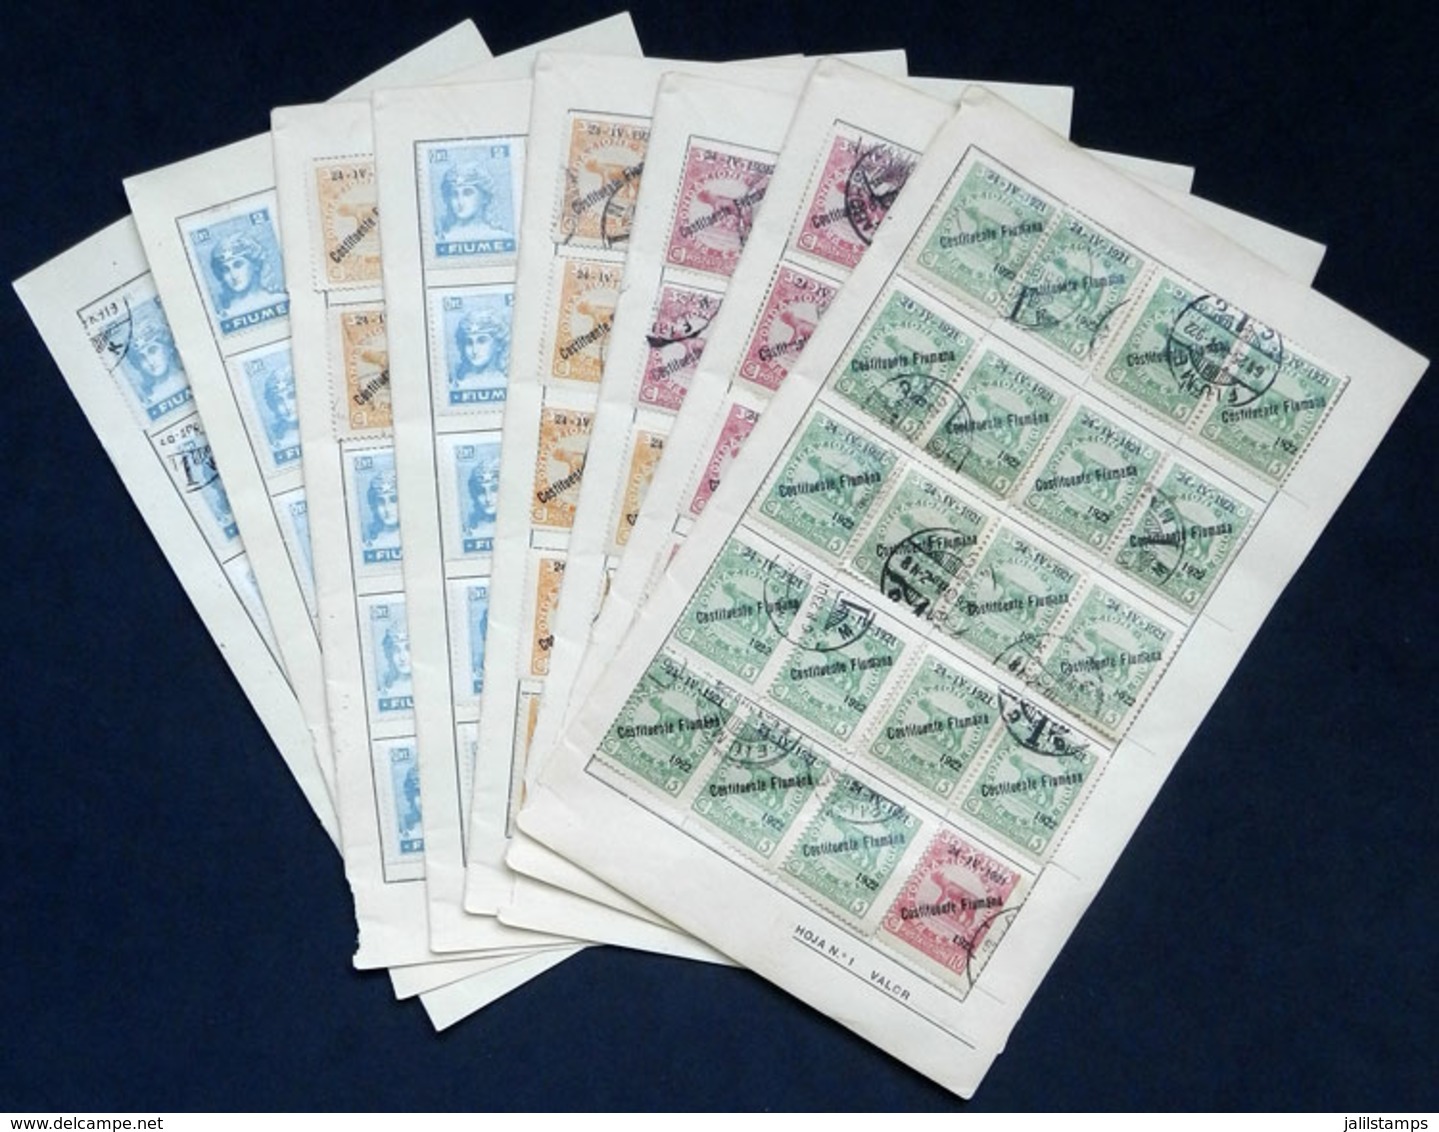 ITALY - FIUME: 9 Pages Of Approvals Book With (approximately) About 180 Stamps, Used Or Mint, Fine To Very Fine G - Fiume